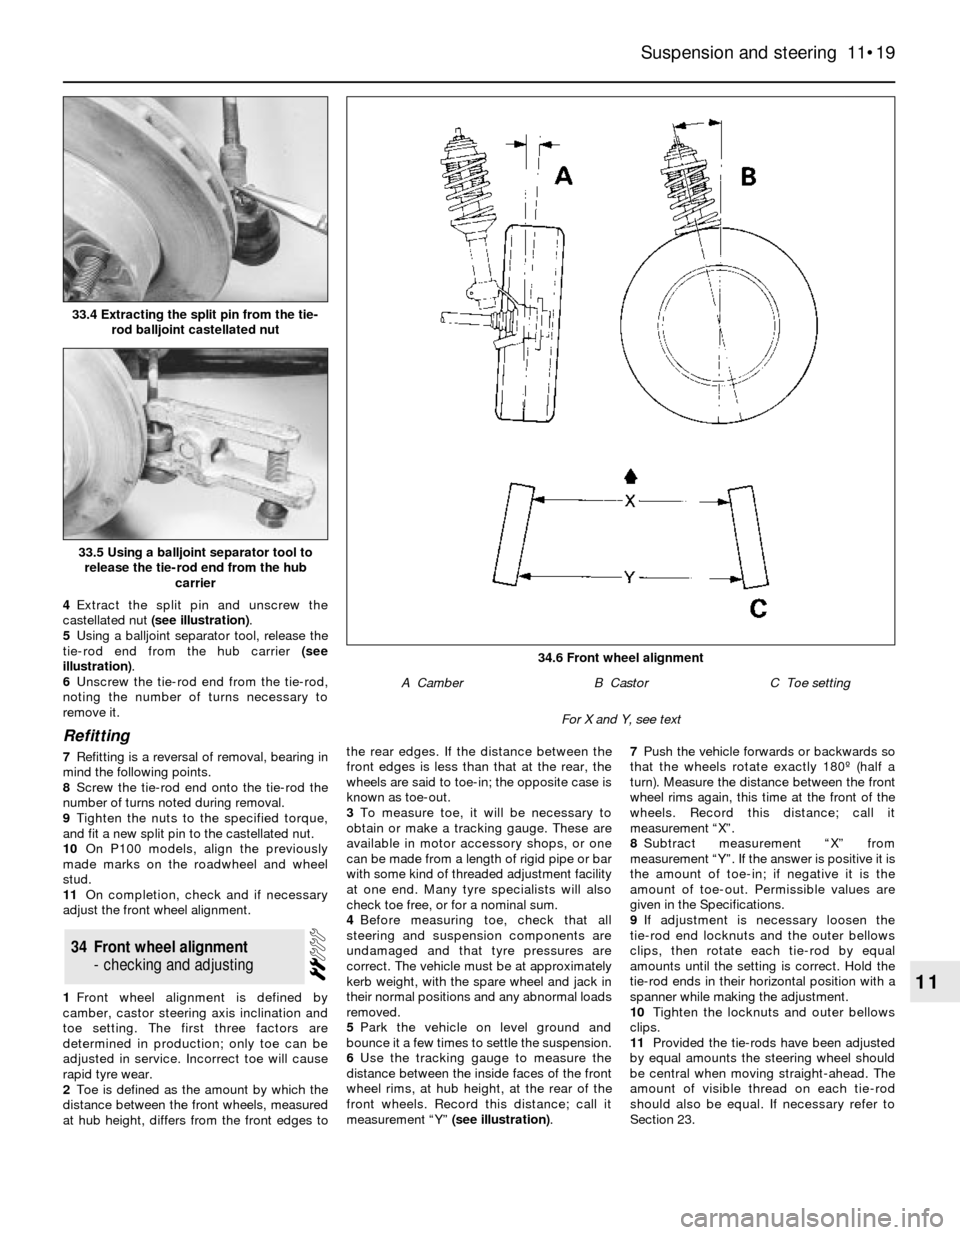 FORD SIERRA 1989 2.G Suspension And Steering Workshop Manual 4Extract the split pin and unscrew the
castellated nut (see illustration).
5Using a balljoint separator tool, release the
tie-rod end from the hub carrier (see
illustration).
6Unscrew the tie-rod end 